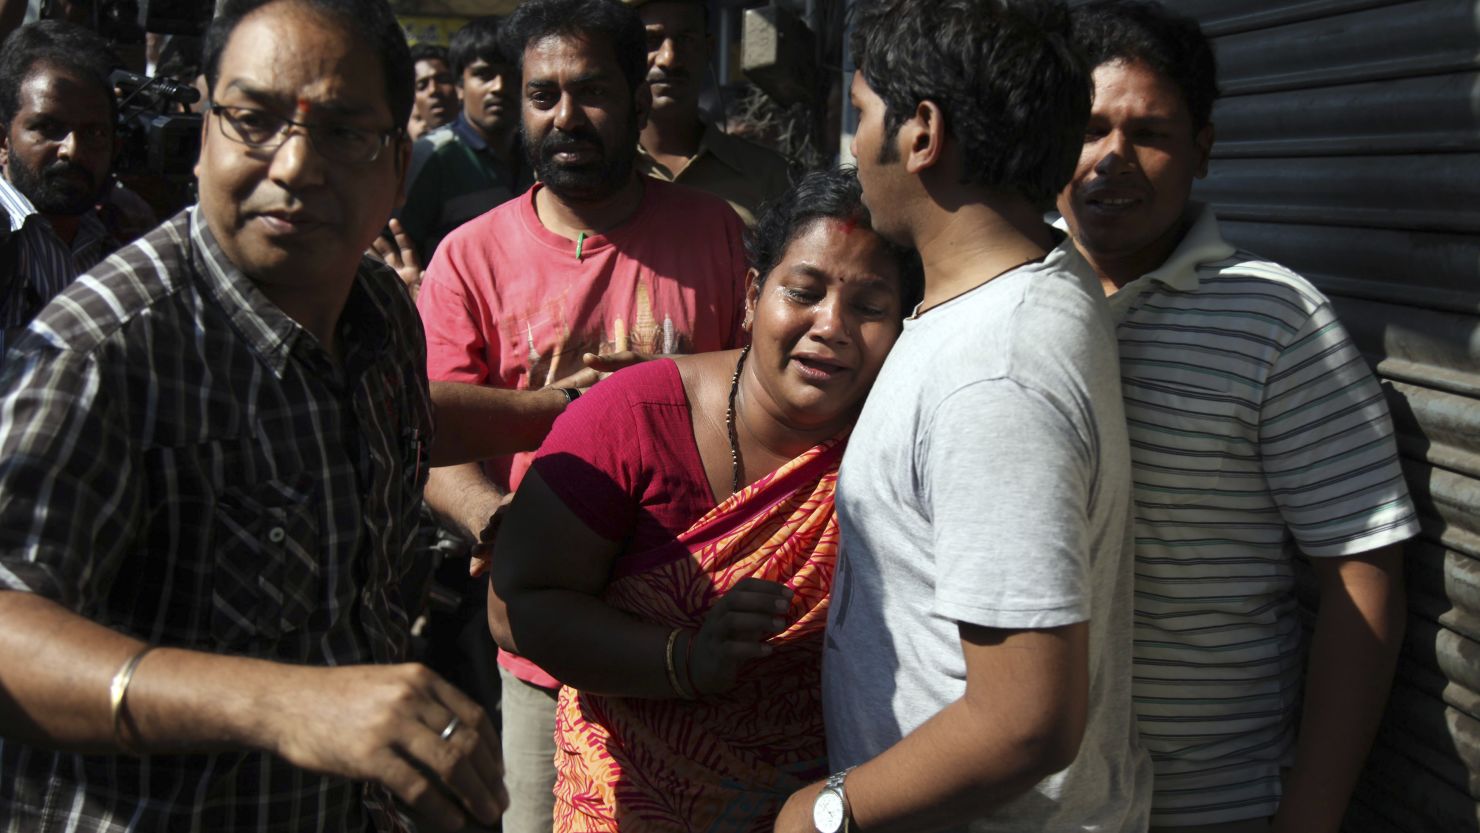 Relatives of passengers on board a crashed bus gather outside the offices of a the bus operator, Hyderabad, Oct. 30, 2013.